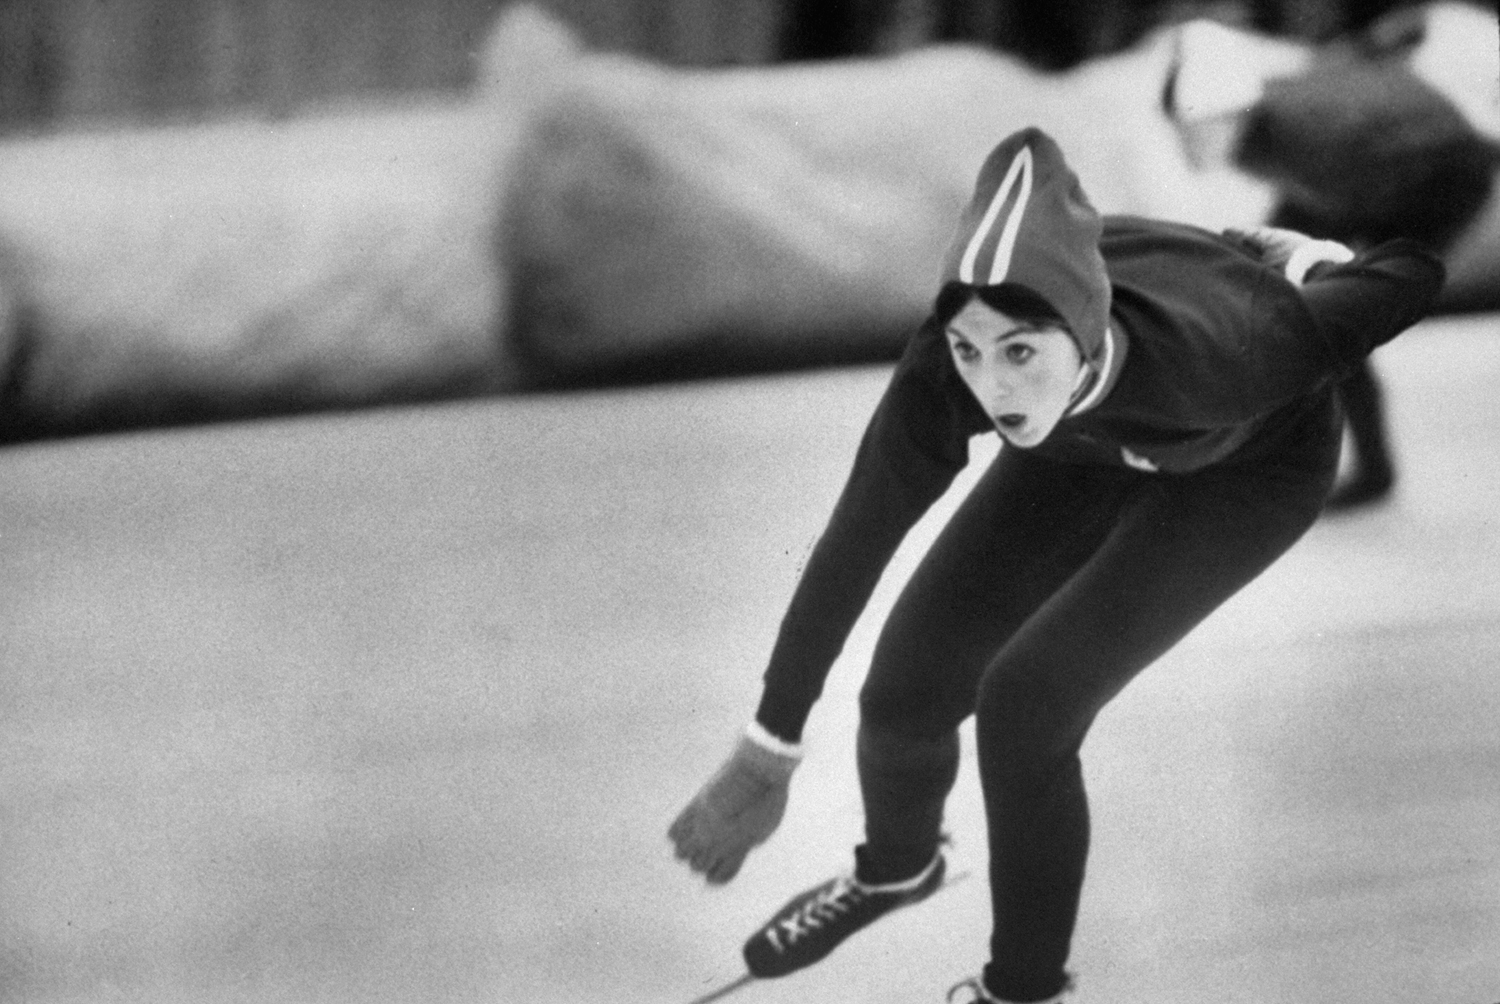 American speed skater and four-time Olympic medalist Dianne Holum, Grenoble Olympics, 1968.